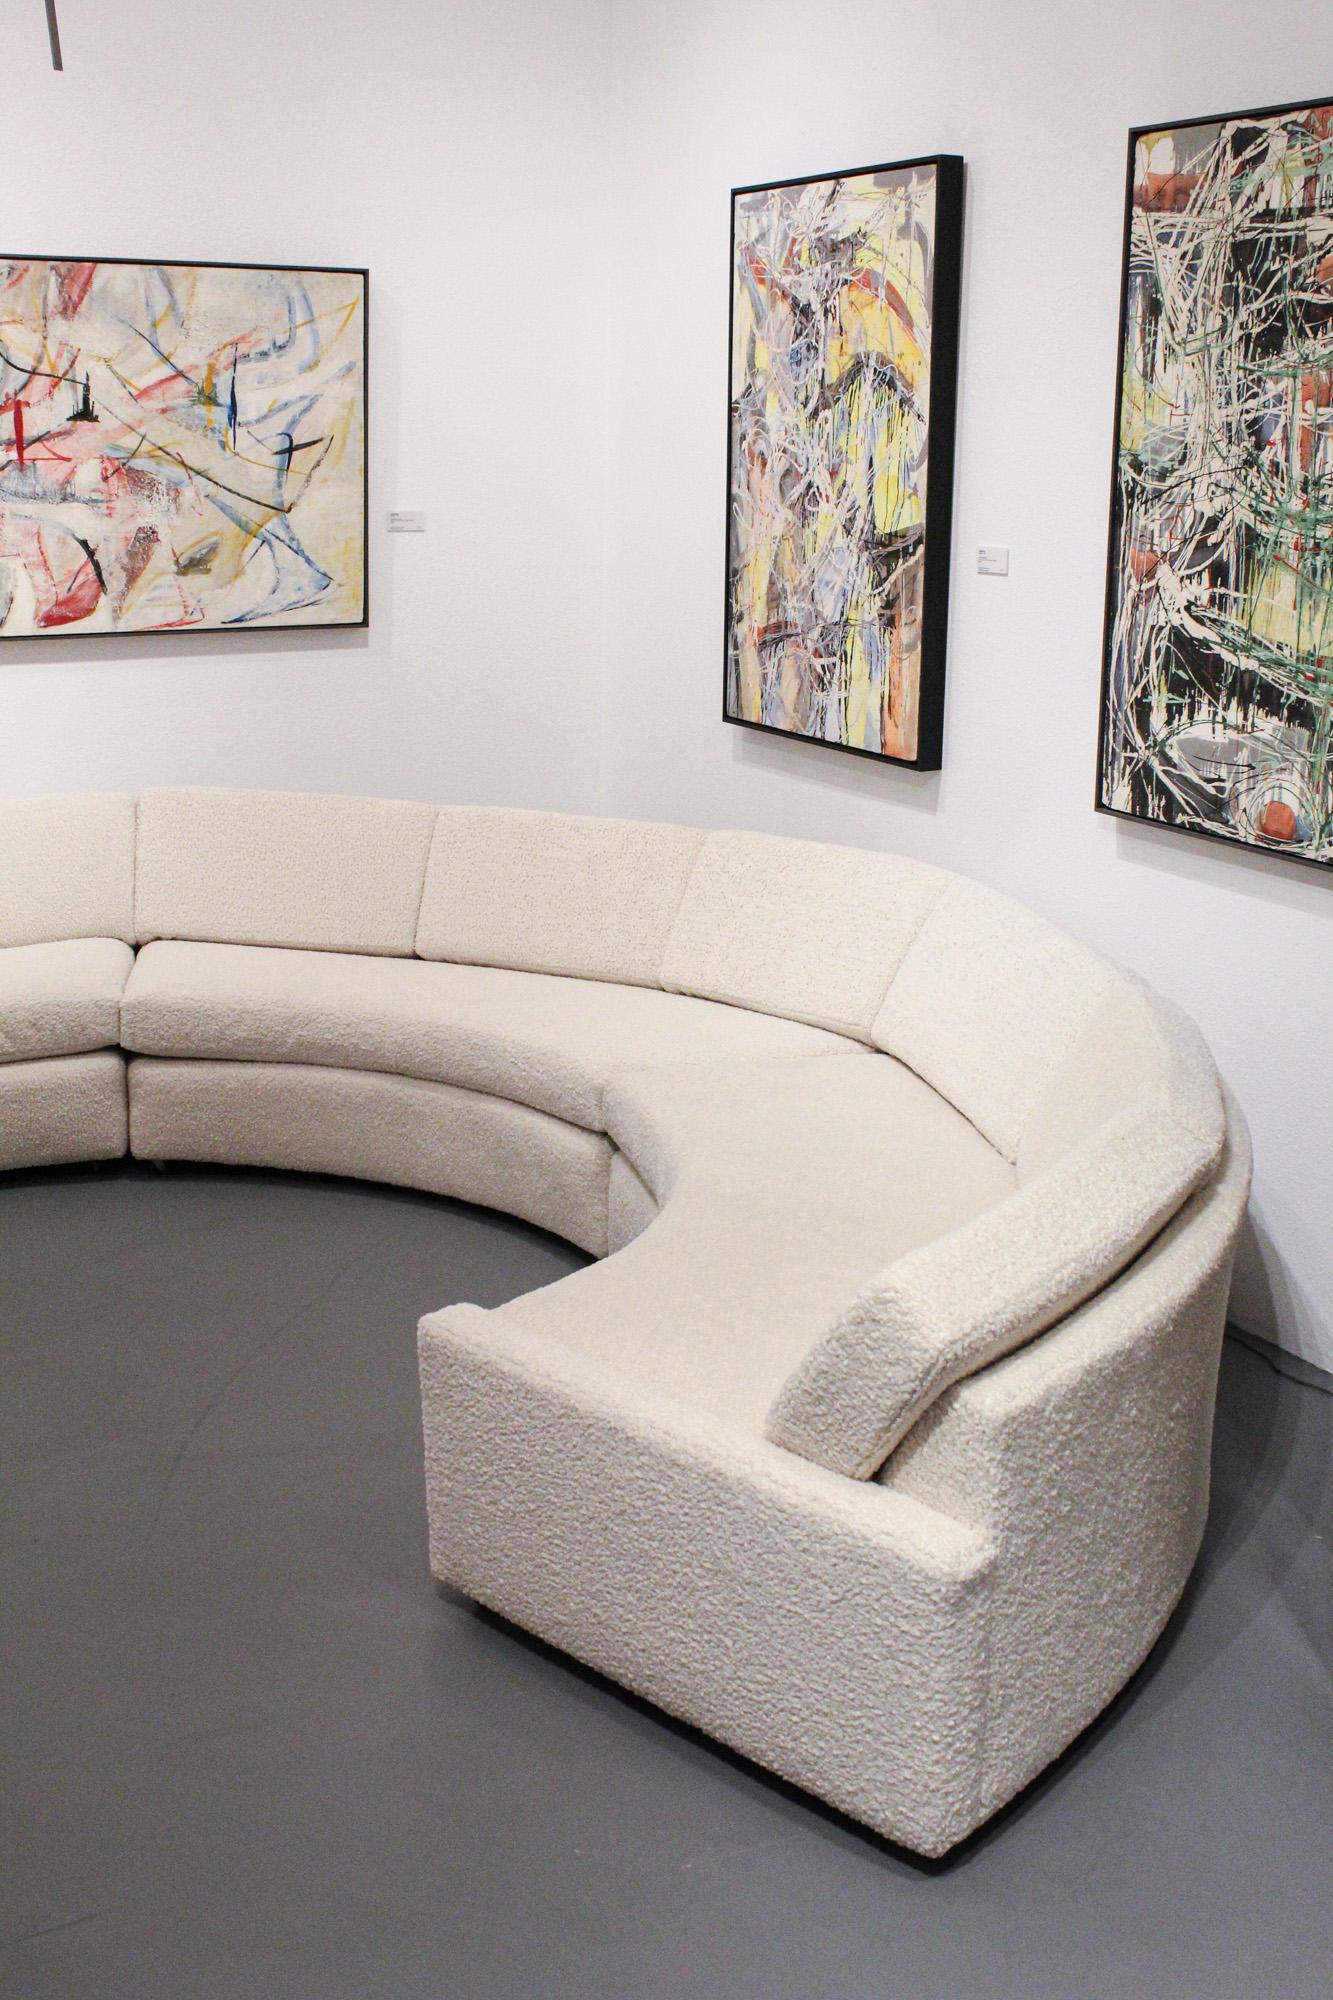 Beautiful Early 1968 three piece Milo Baughman semi circular sofa for Thayer Coggin. 

Sofa has been reupholstered in a stunning thick nubby Boucle Fabric. This is an incredible Sofa that would make any room a Mid Century classic statement piece.